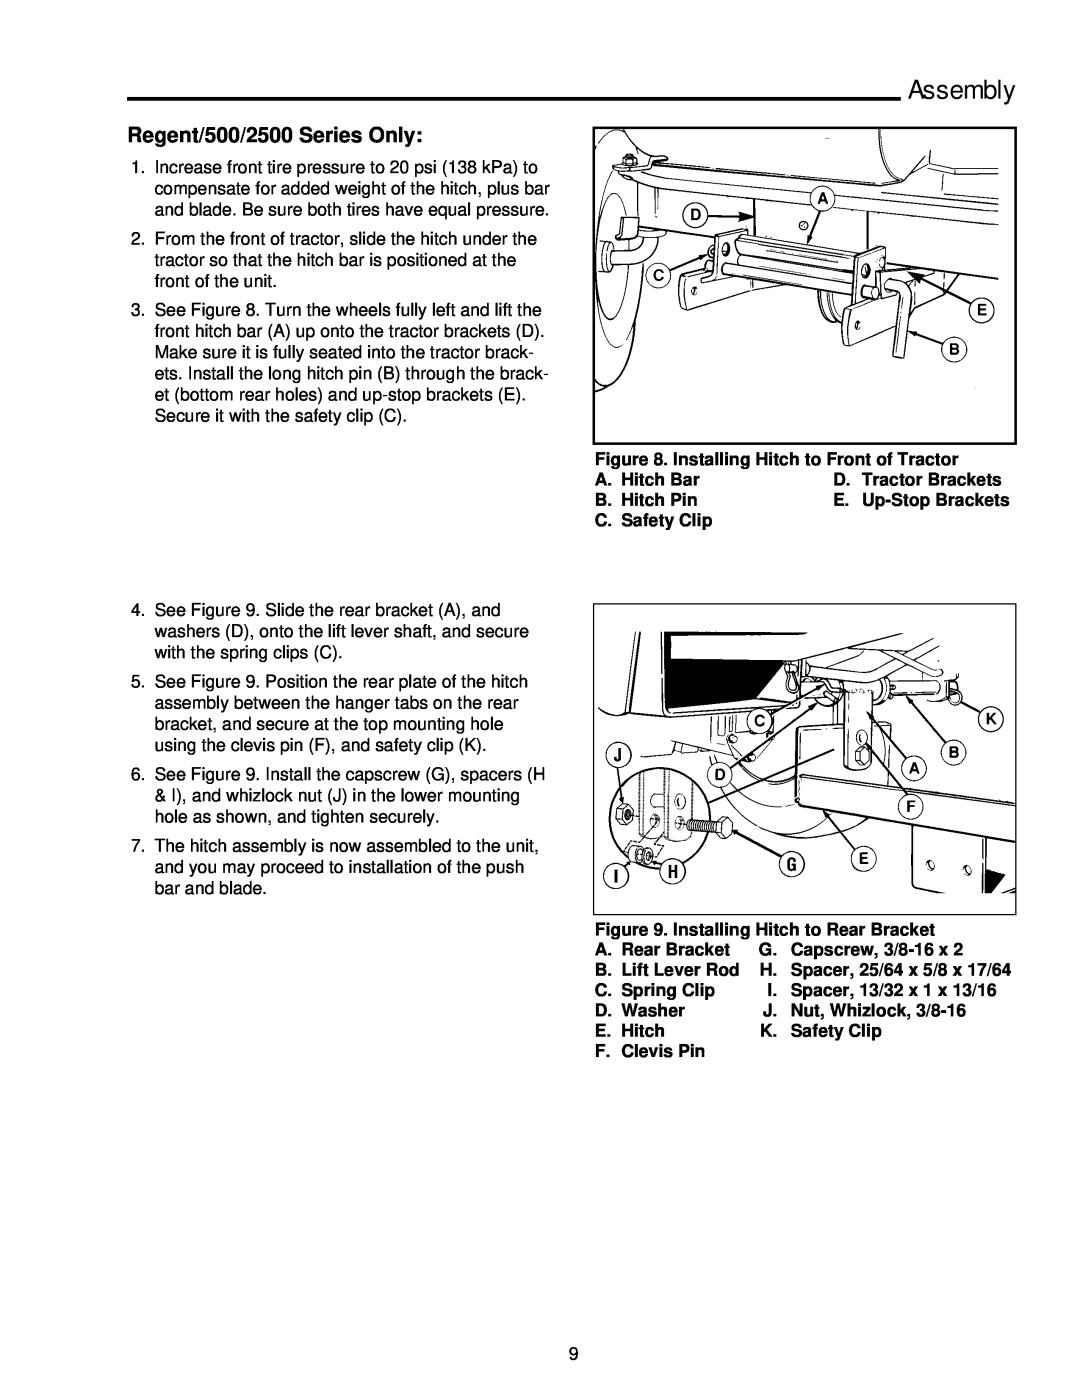 Simplicity 1691620 Installing Hitch to Front of Tractor, A. Hitch Bar, D. Tractor Brackets, B. Hitch Pin, C. Safety Clip 